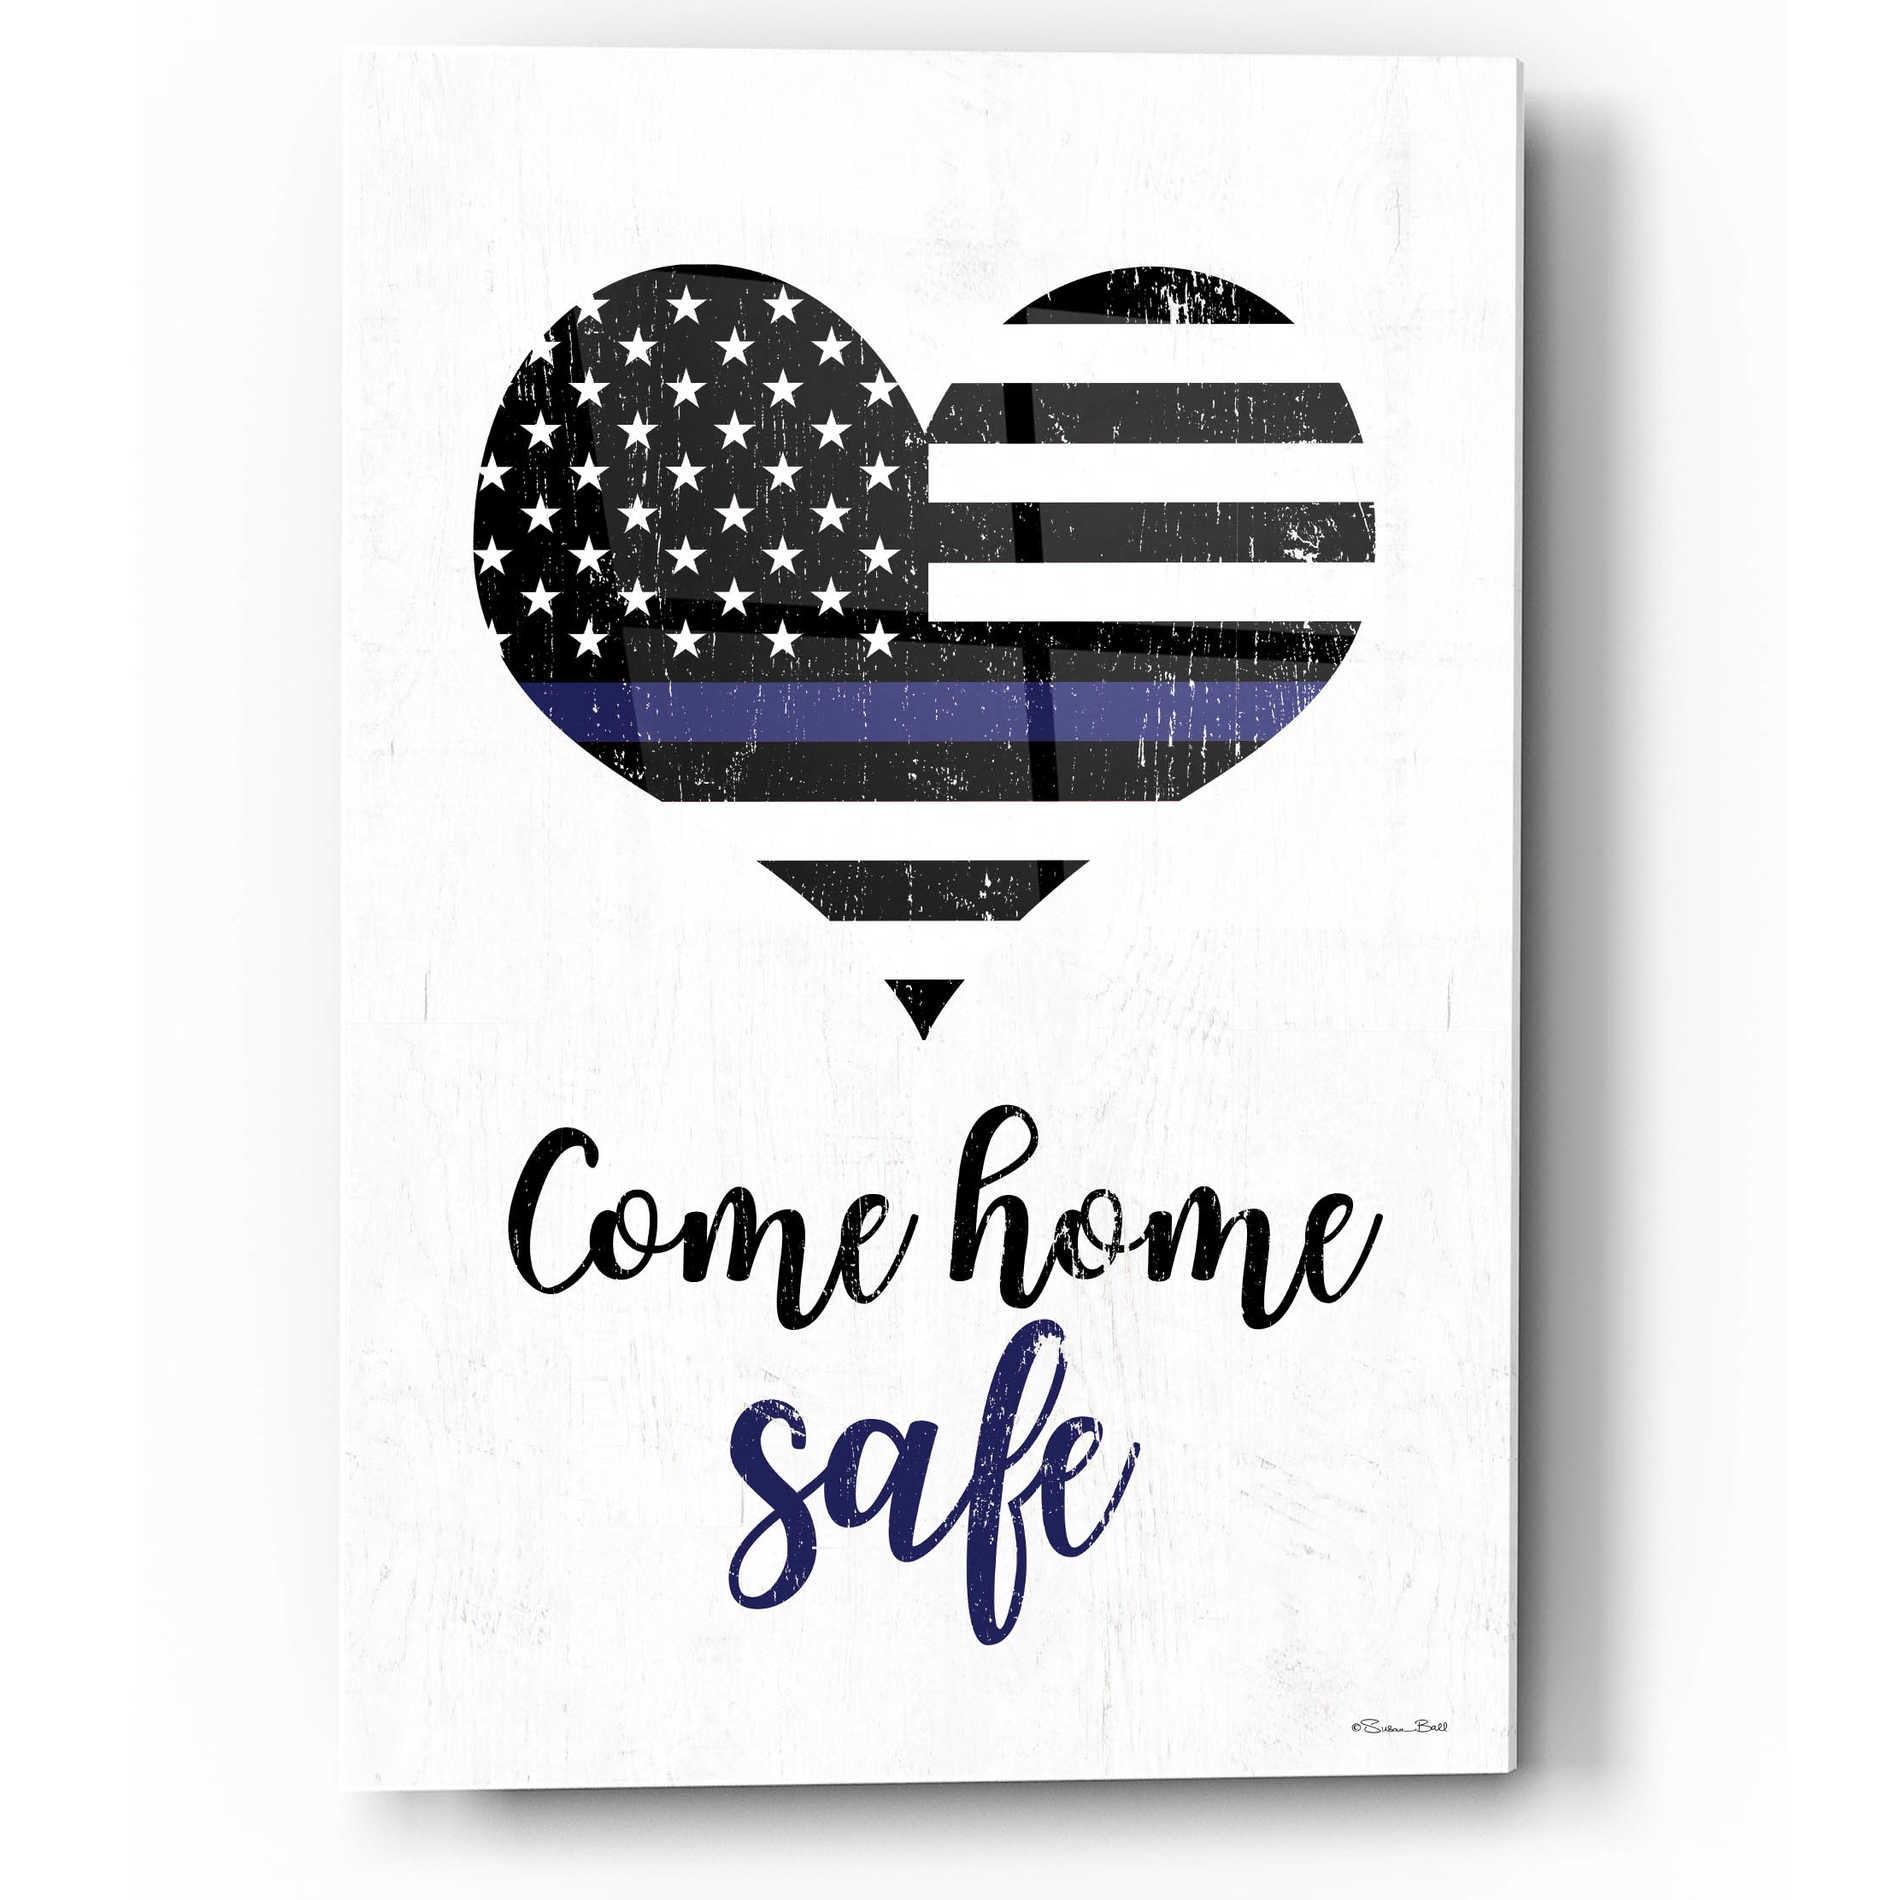 Epic Art 'Come Home Safe' by Susan Ball, Acrylic Glass Wall Art,12x16